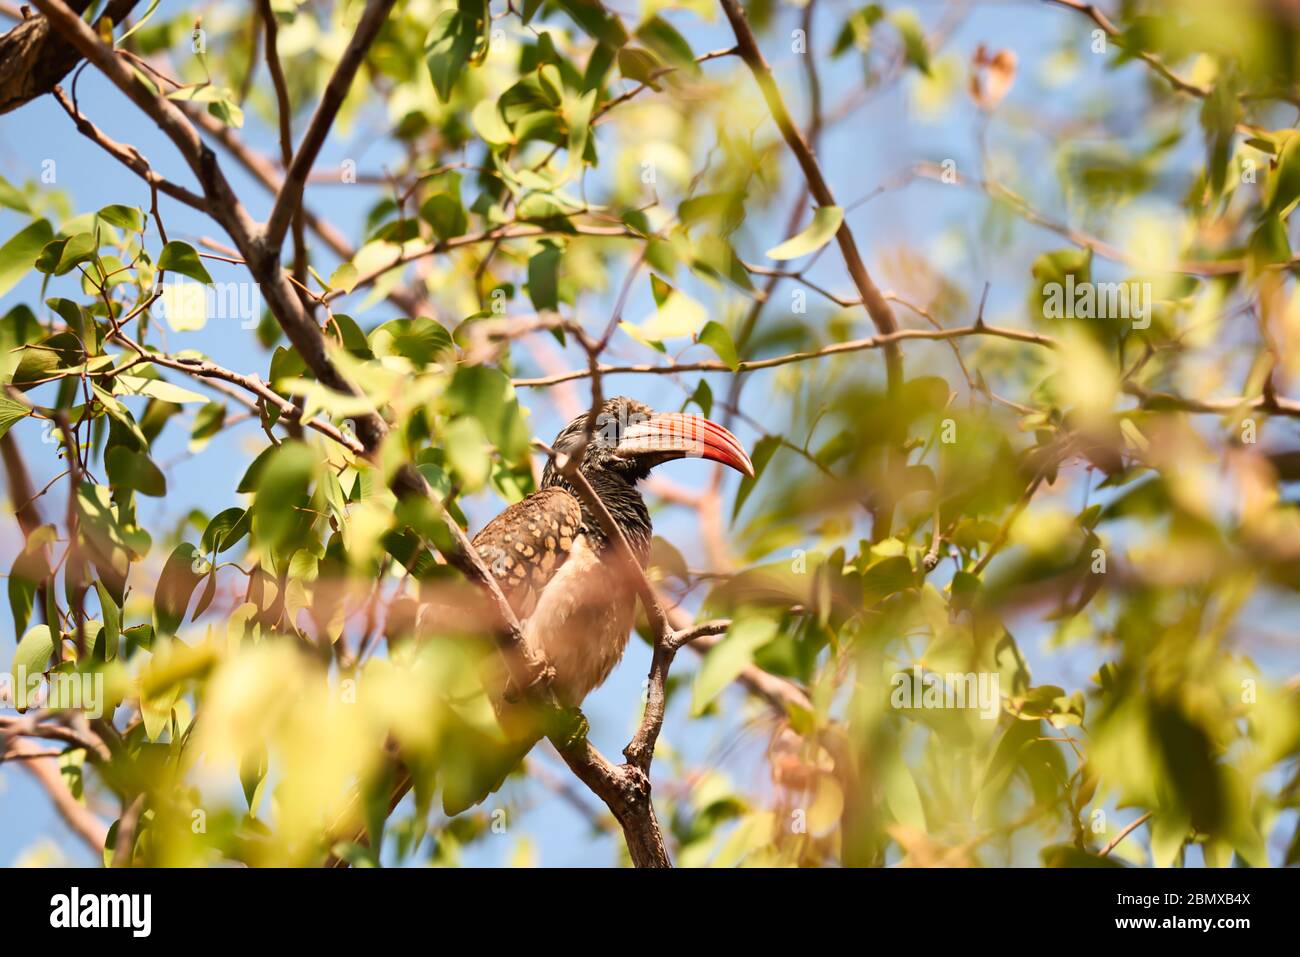 A red-billed hornbill in a tree in Damaraland in Namibia Stock Photo